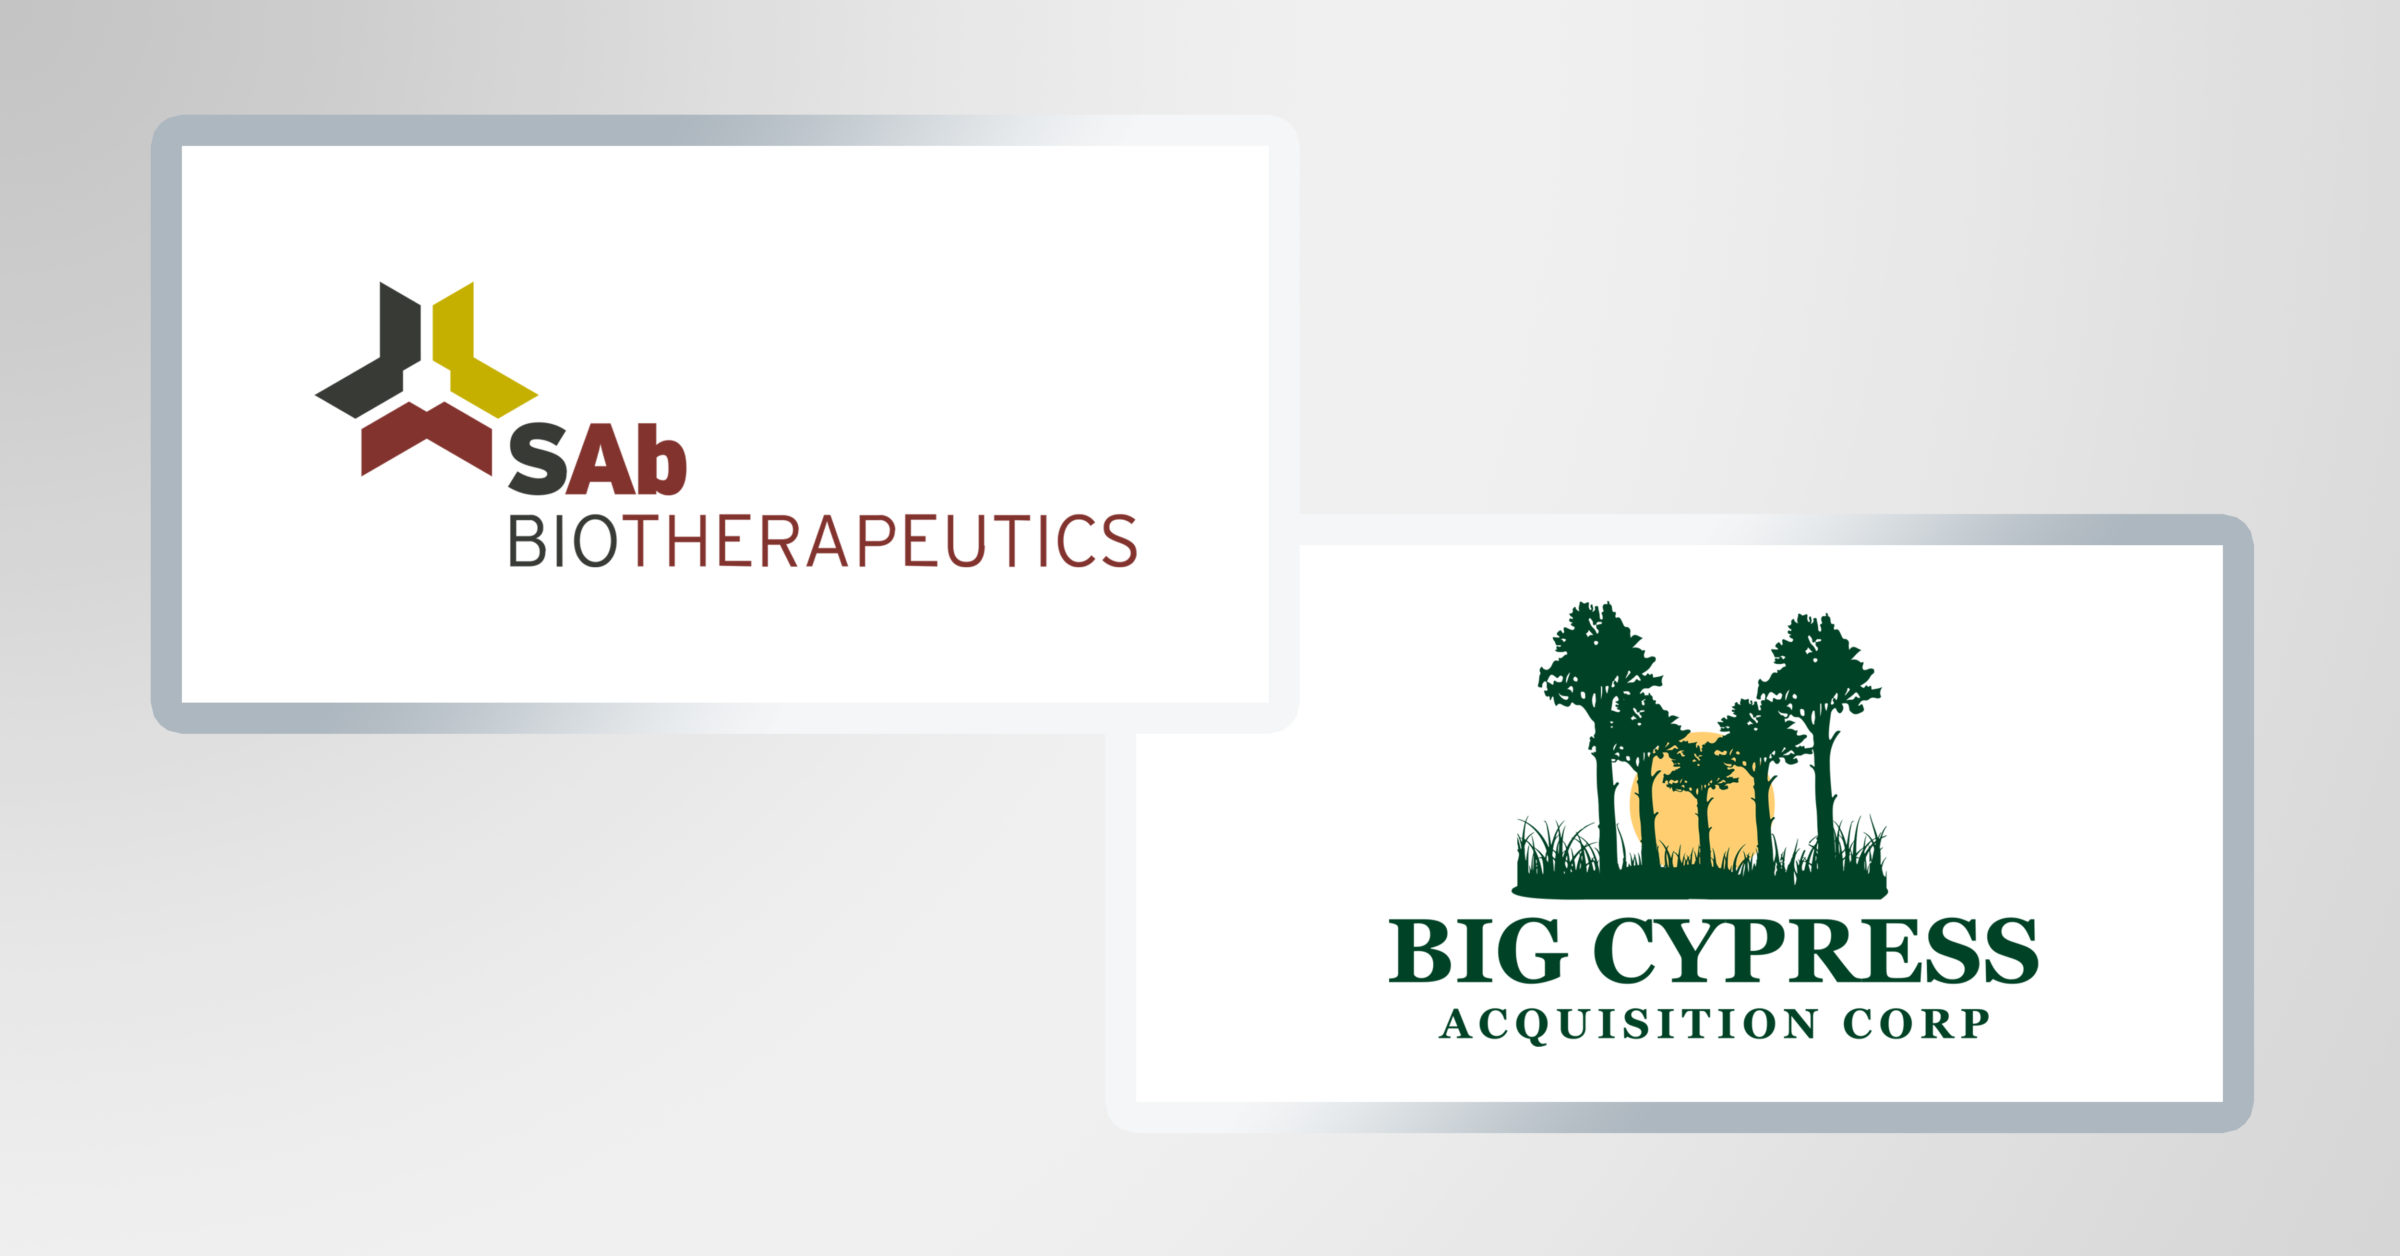 Big Cypress Acquisition Corp. Announces Confidential Submission of S-4 Registration Statement Related to Proposed Business Combination with SAB Biotherapeutics